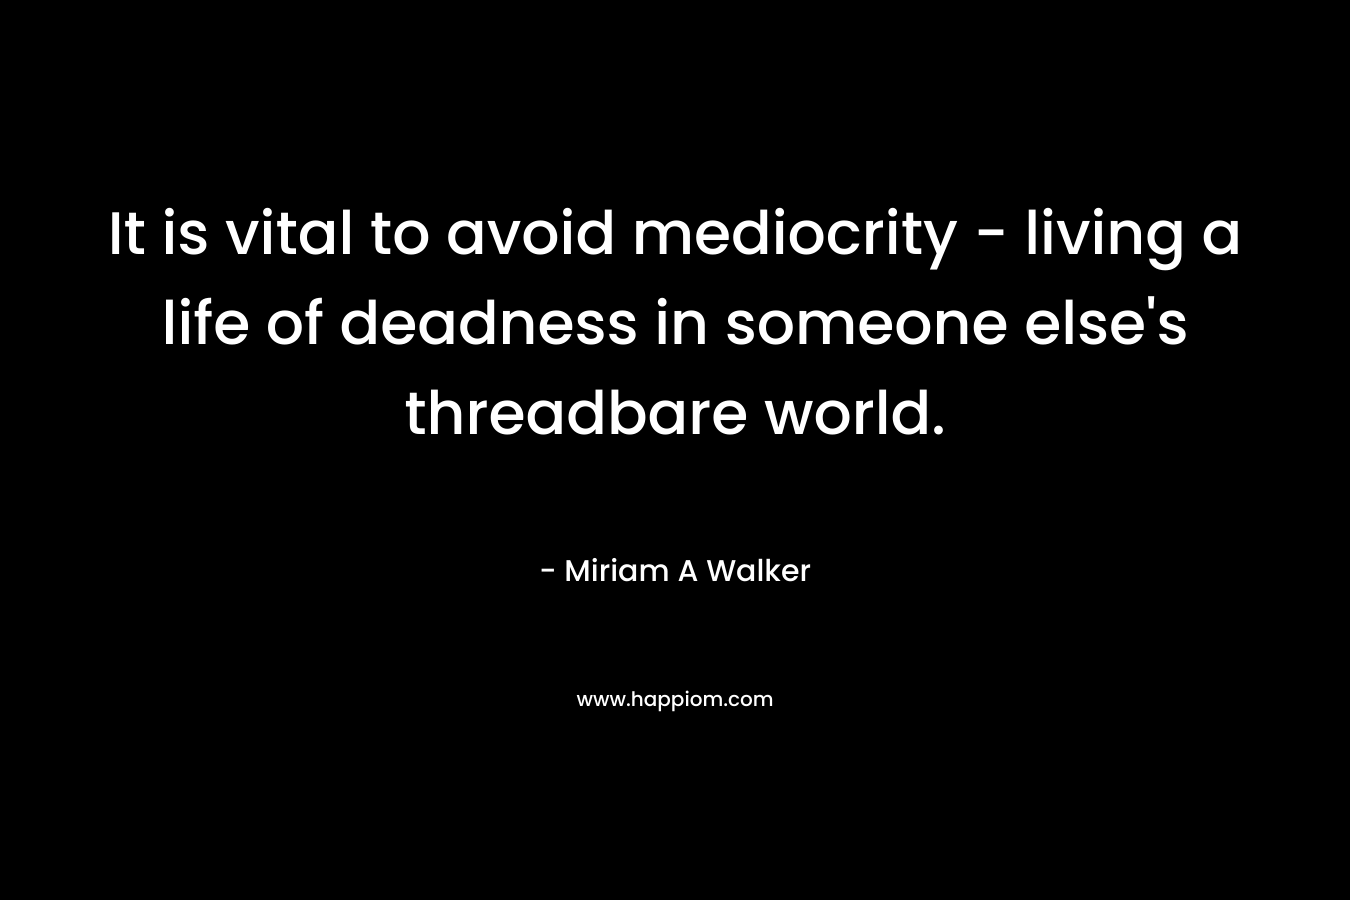 It is vital to avoid mediocrity - living a life of deadness in someone else's threadbare world.